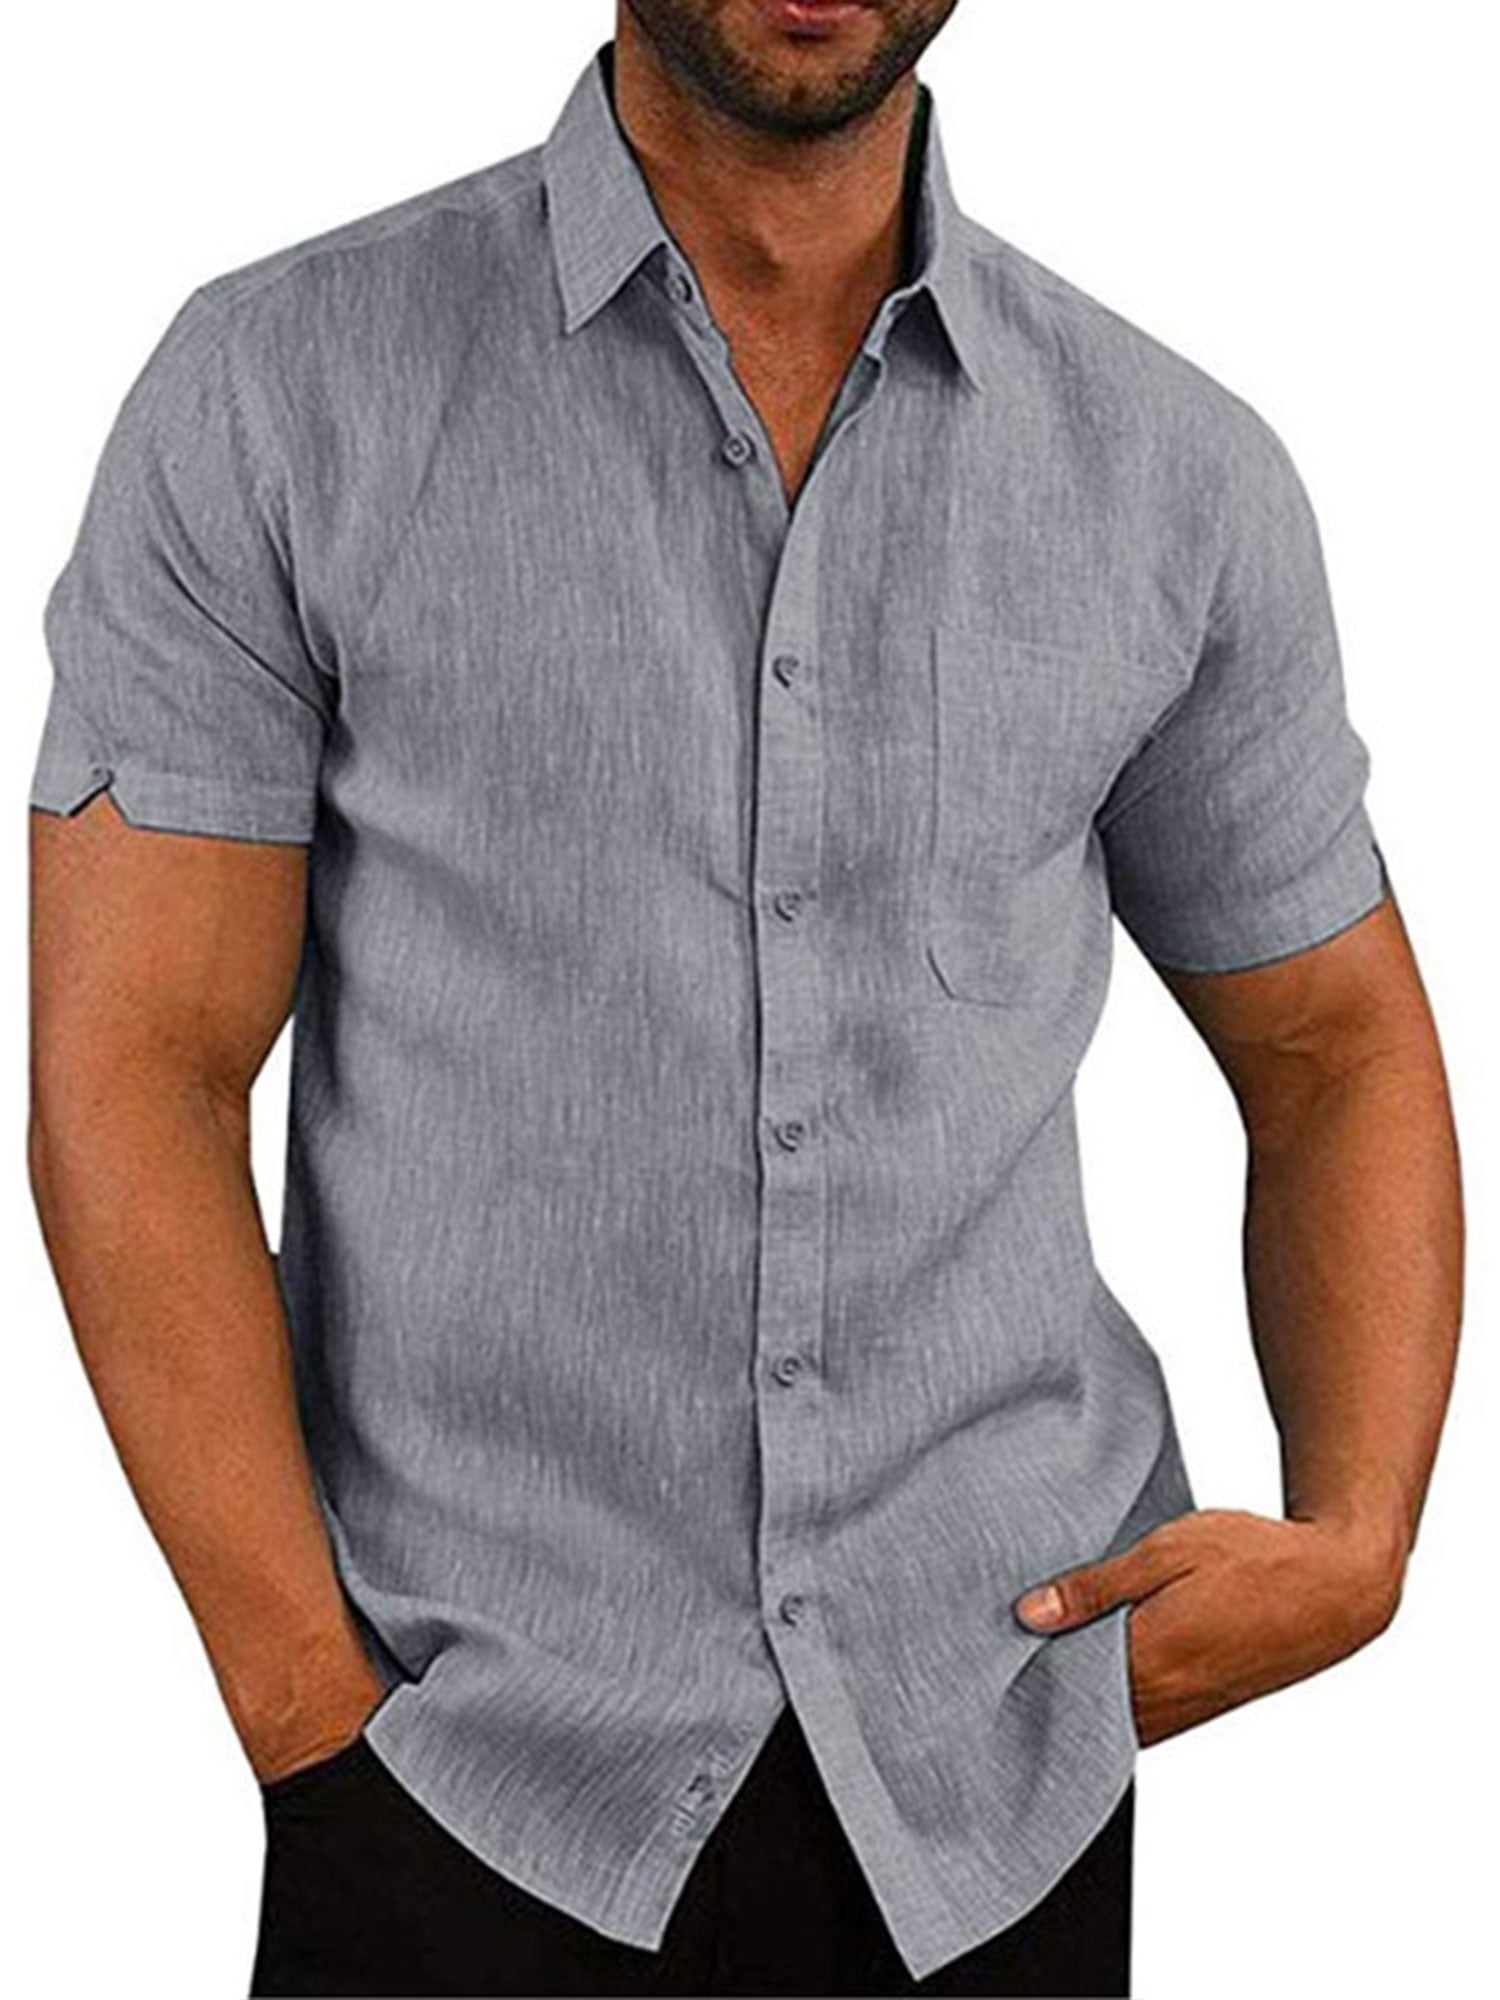 MENS SUMMER TWO POCKETS SHORT SLEEVES PARTY CASUAL DRESS SHIRT NOW £16.99 464 